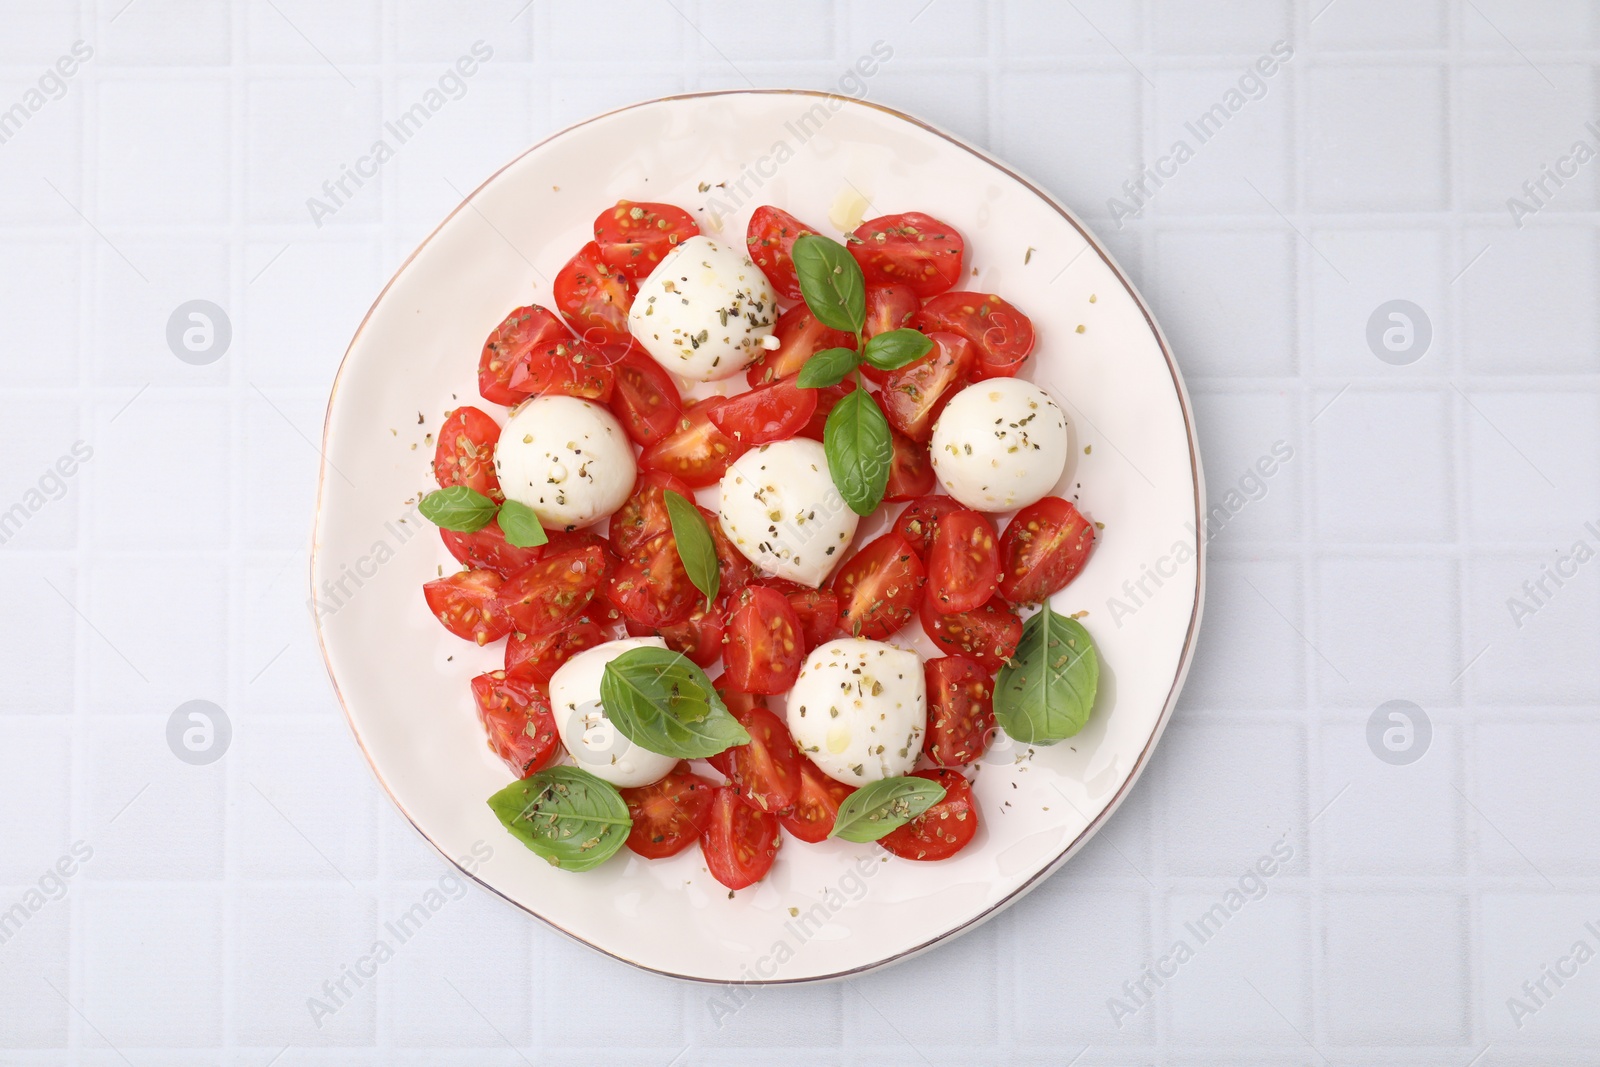 Photo of Tasty salad Caprese with tomatoes, mozzarella balls and basil on white tiled table, top view